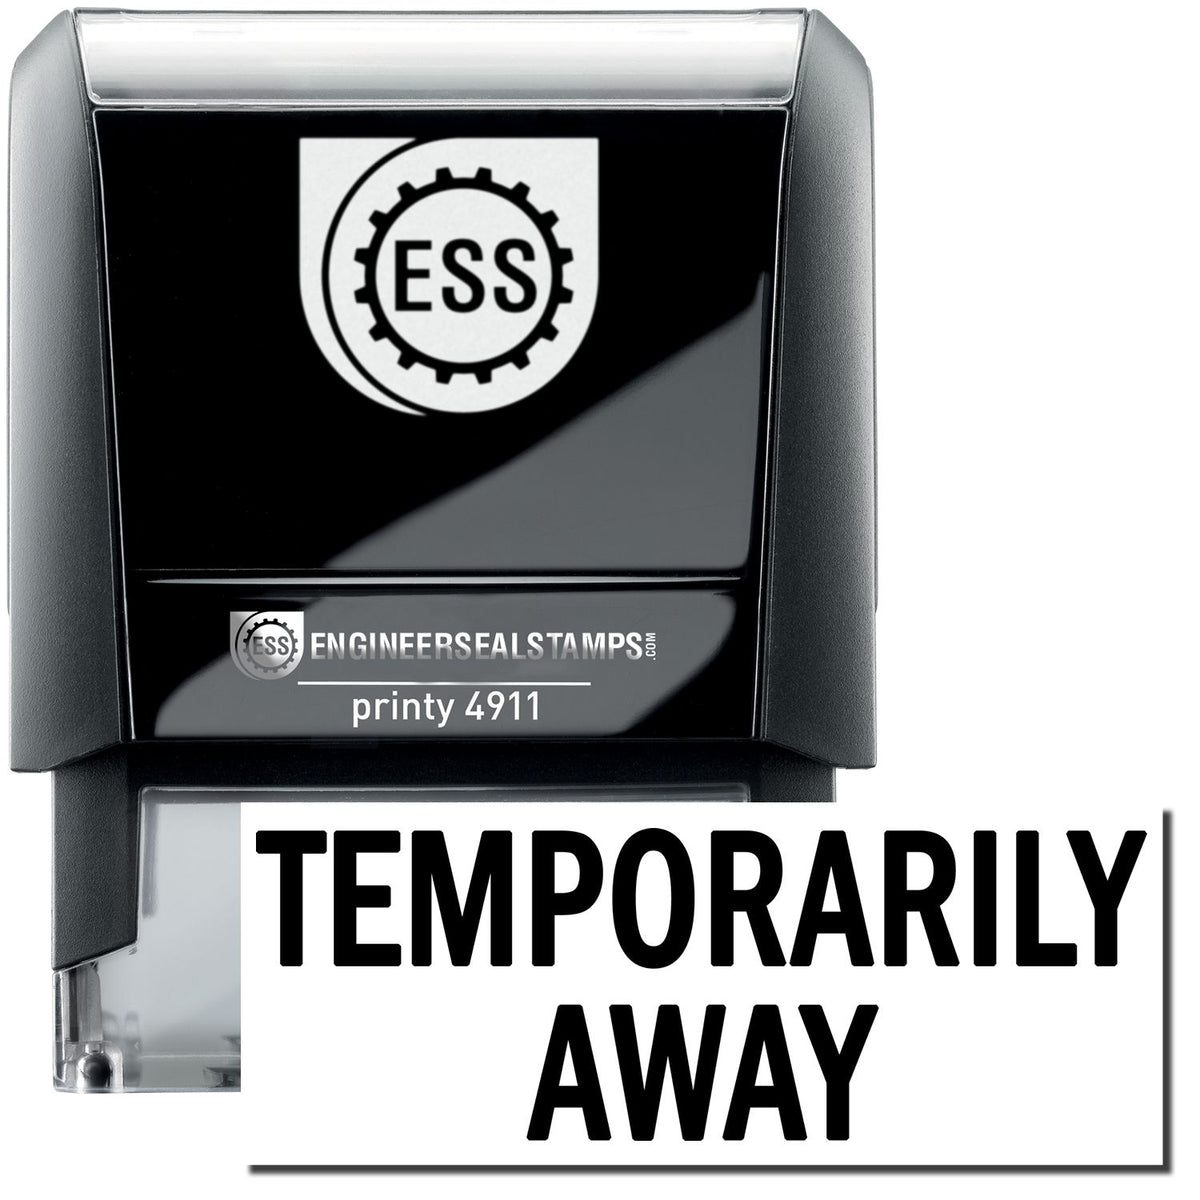 A self-inking stamp with a stamped image showing how the text &quot;TEMPORARILY AWAY&quot; is displayed after stamping.